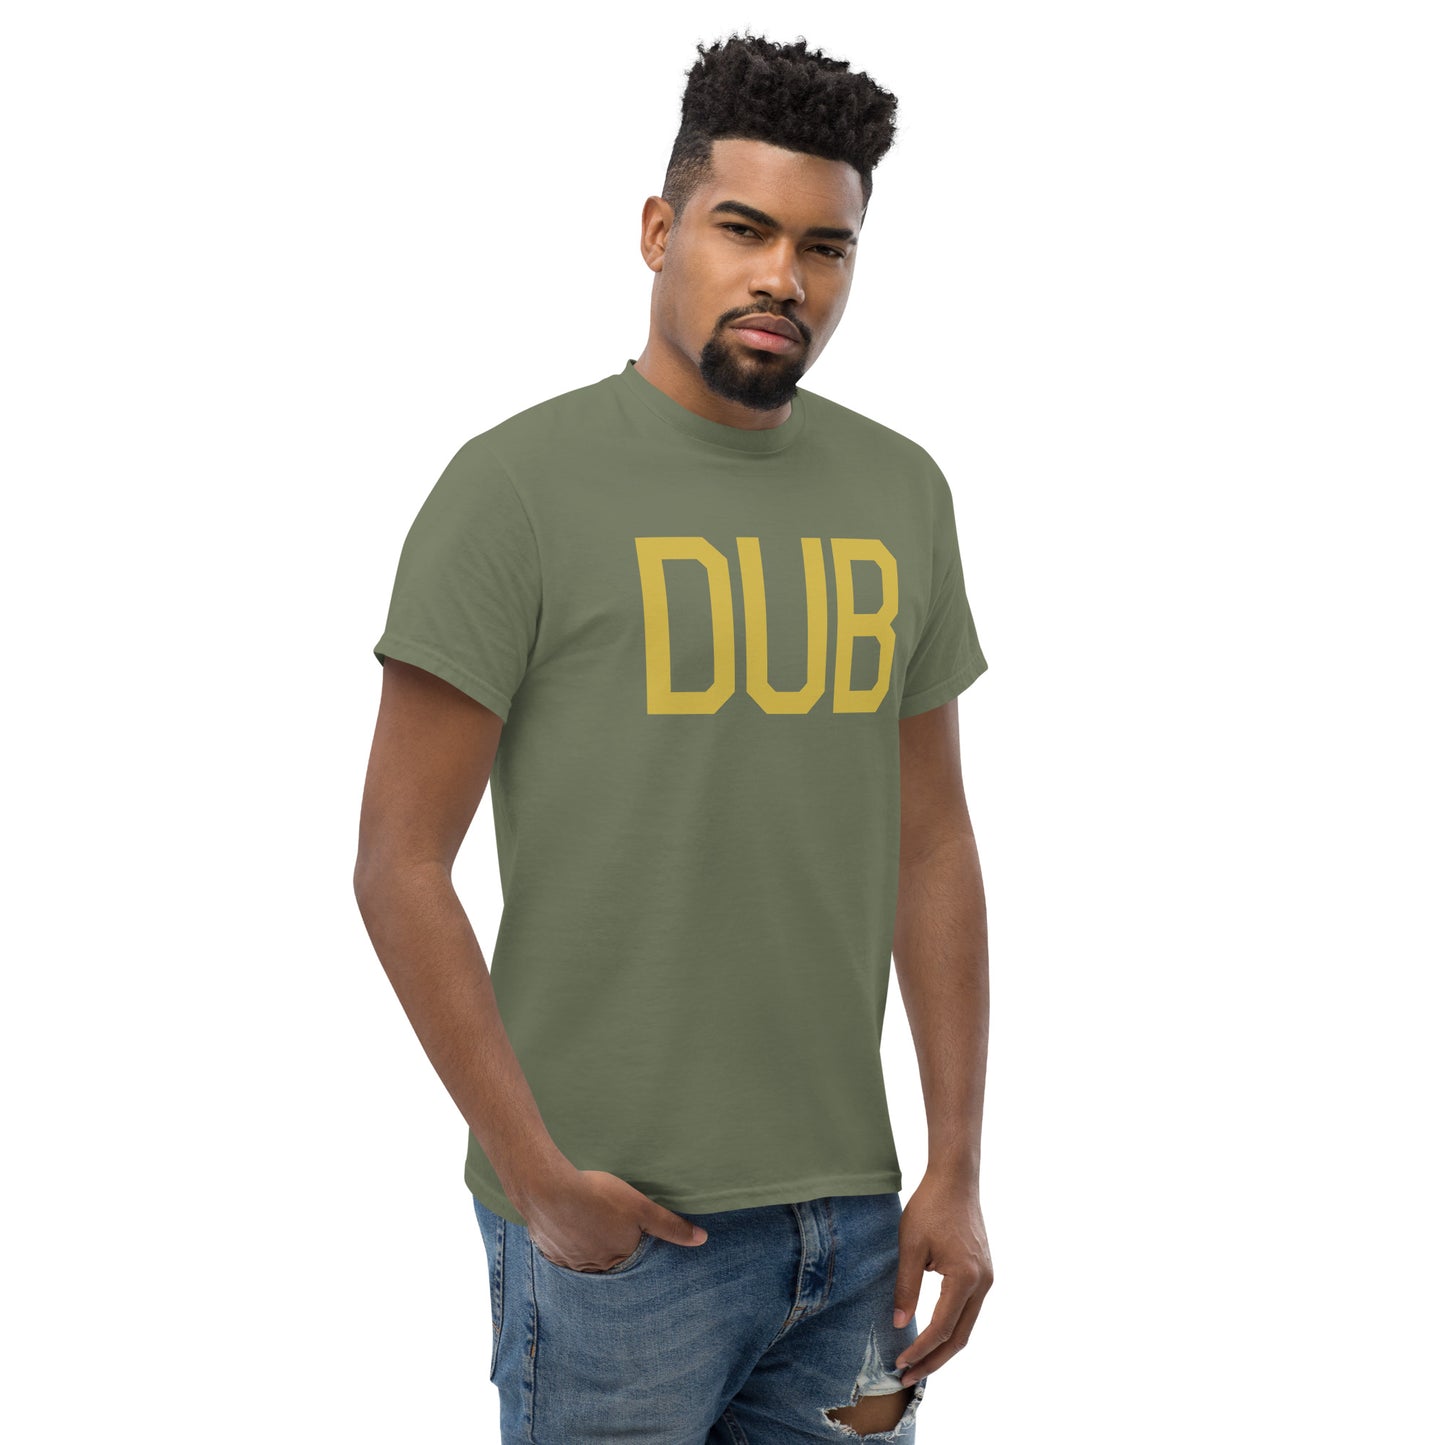 Aviation Enthusiast Men's Tee - Old Gold Graphic • DUB Dublin • YHM Designs - Image 08